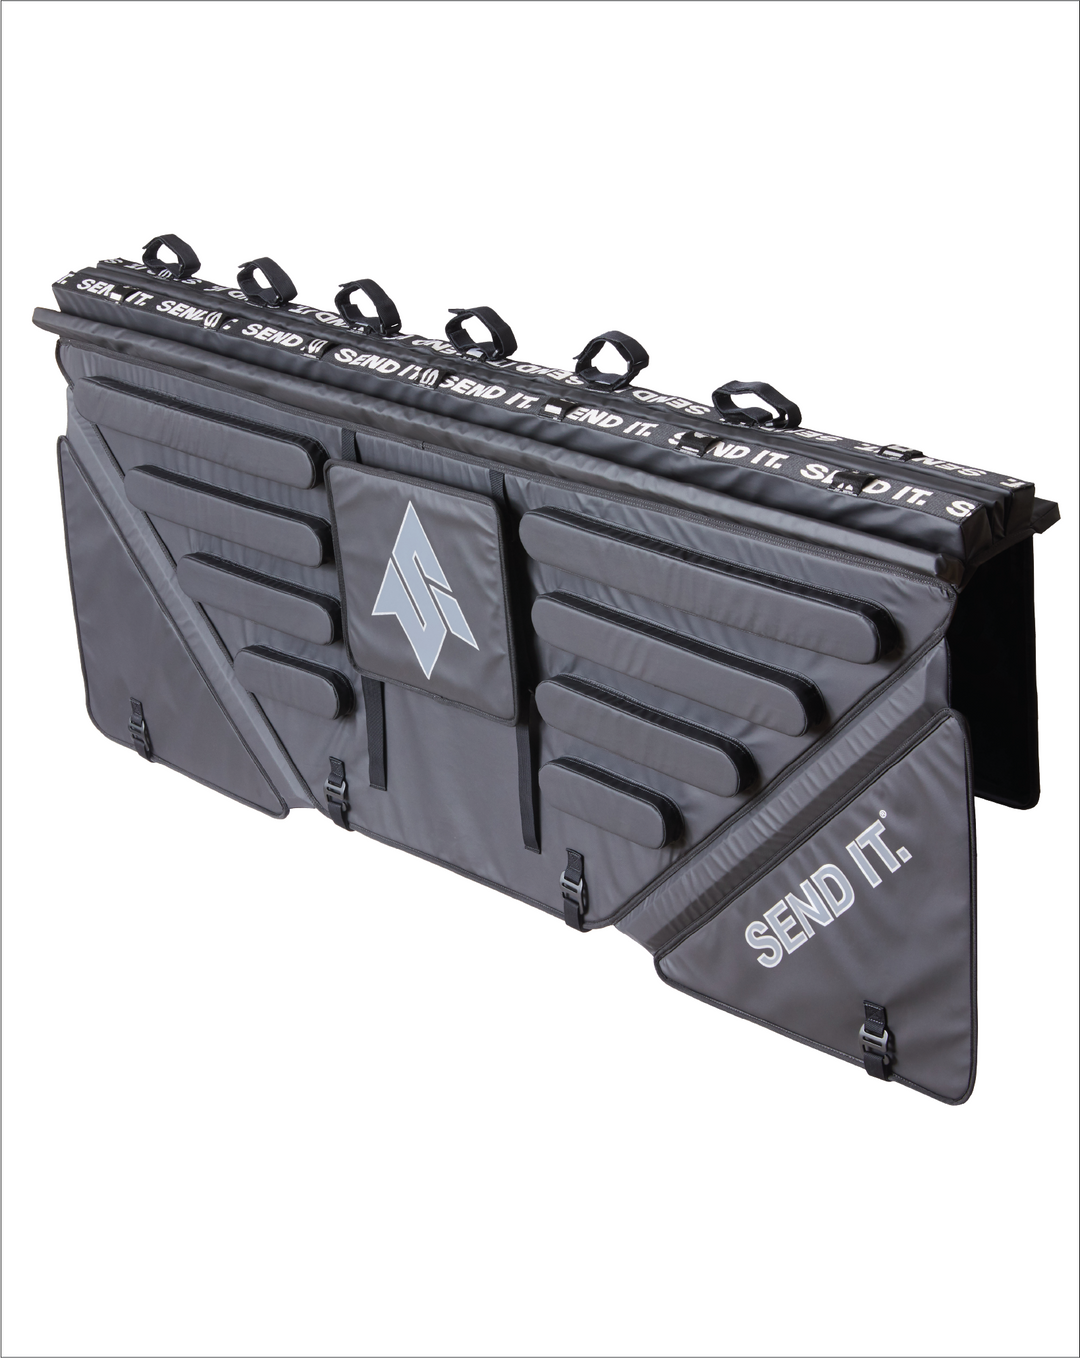 Image of the full size Send It High Roller Tailgate Pad. Shows the pad from the front and at angle as if the tailgate pad was installed on a truck with inside of the tailgate pad showing. The full size truck tailgate bike pad has a sliding window, heavy duty padding, and 6 straps to secure your bikes.